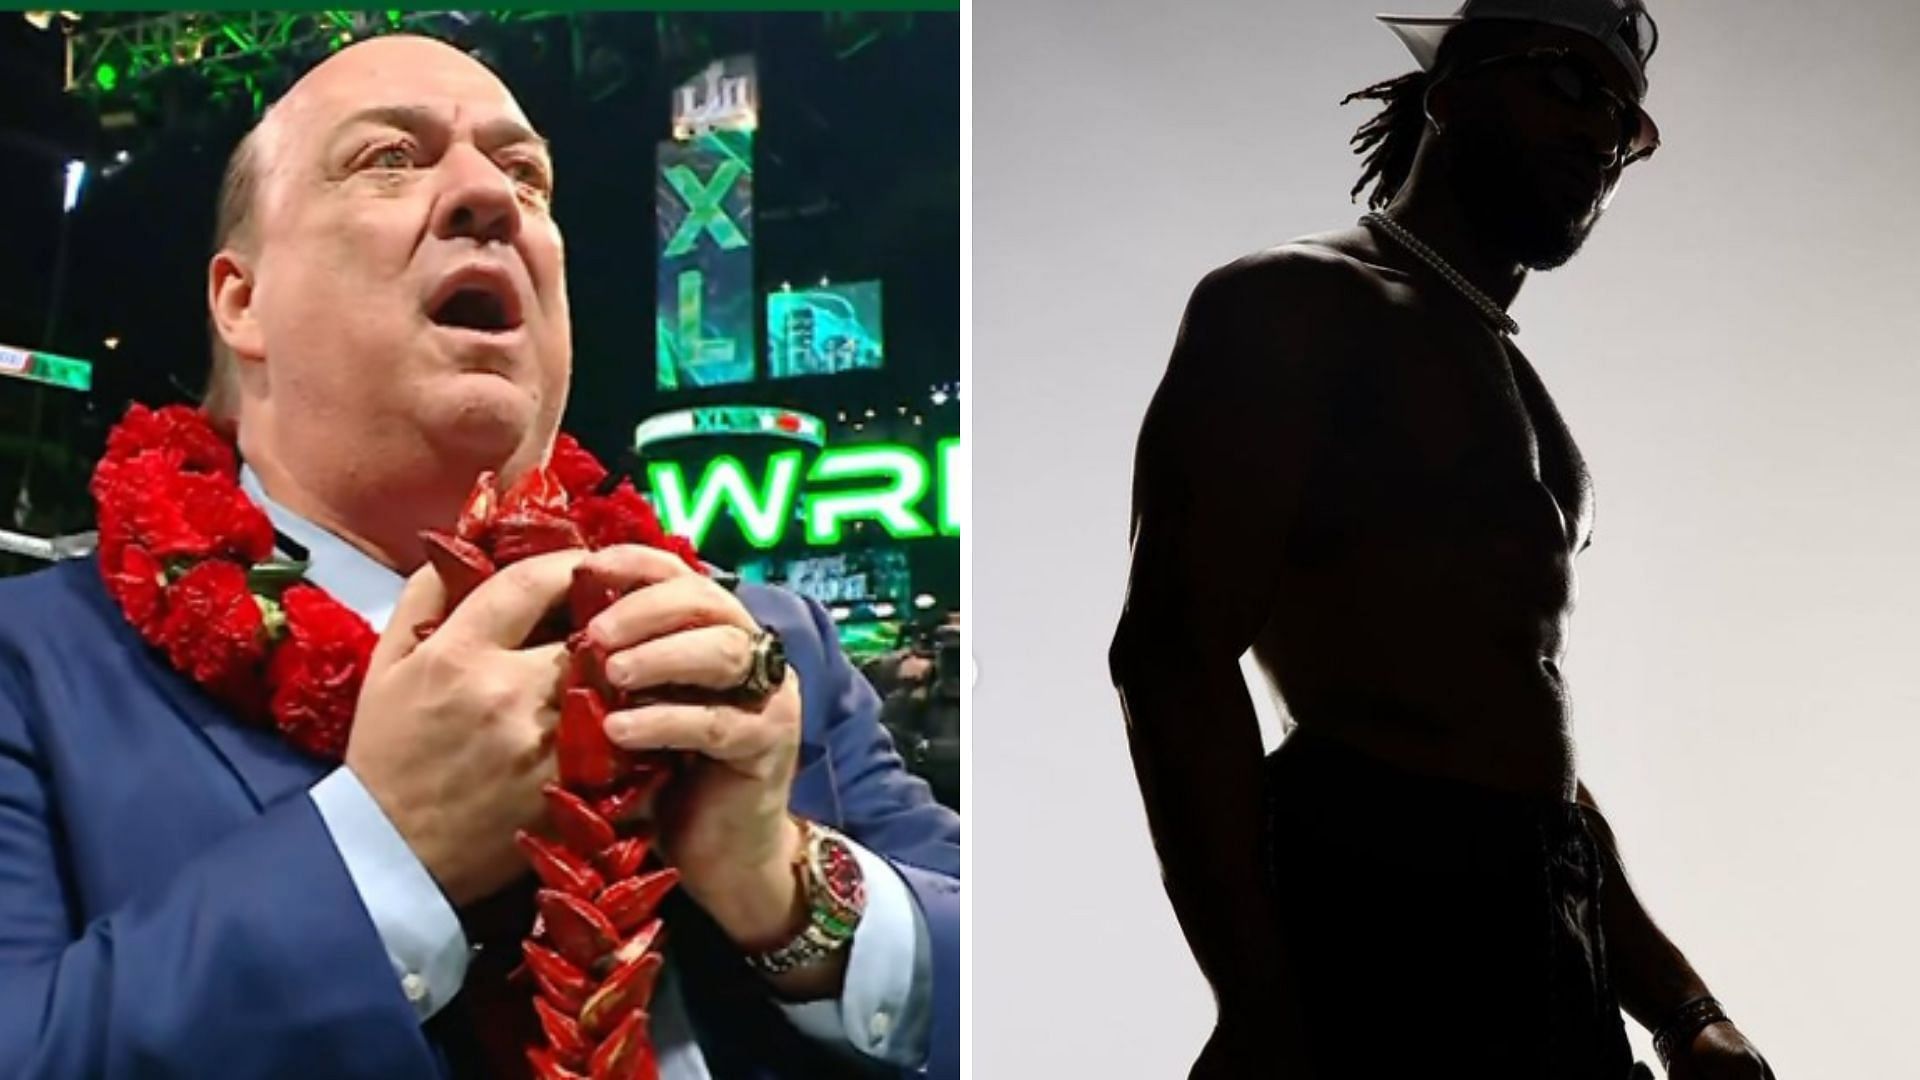 Paul Heyman is a member of The Bloodline [Image credits: stars